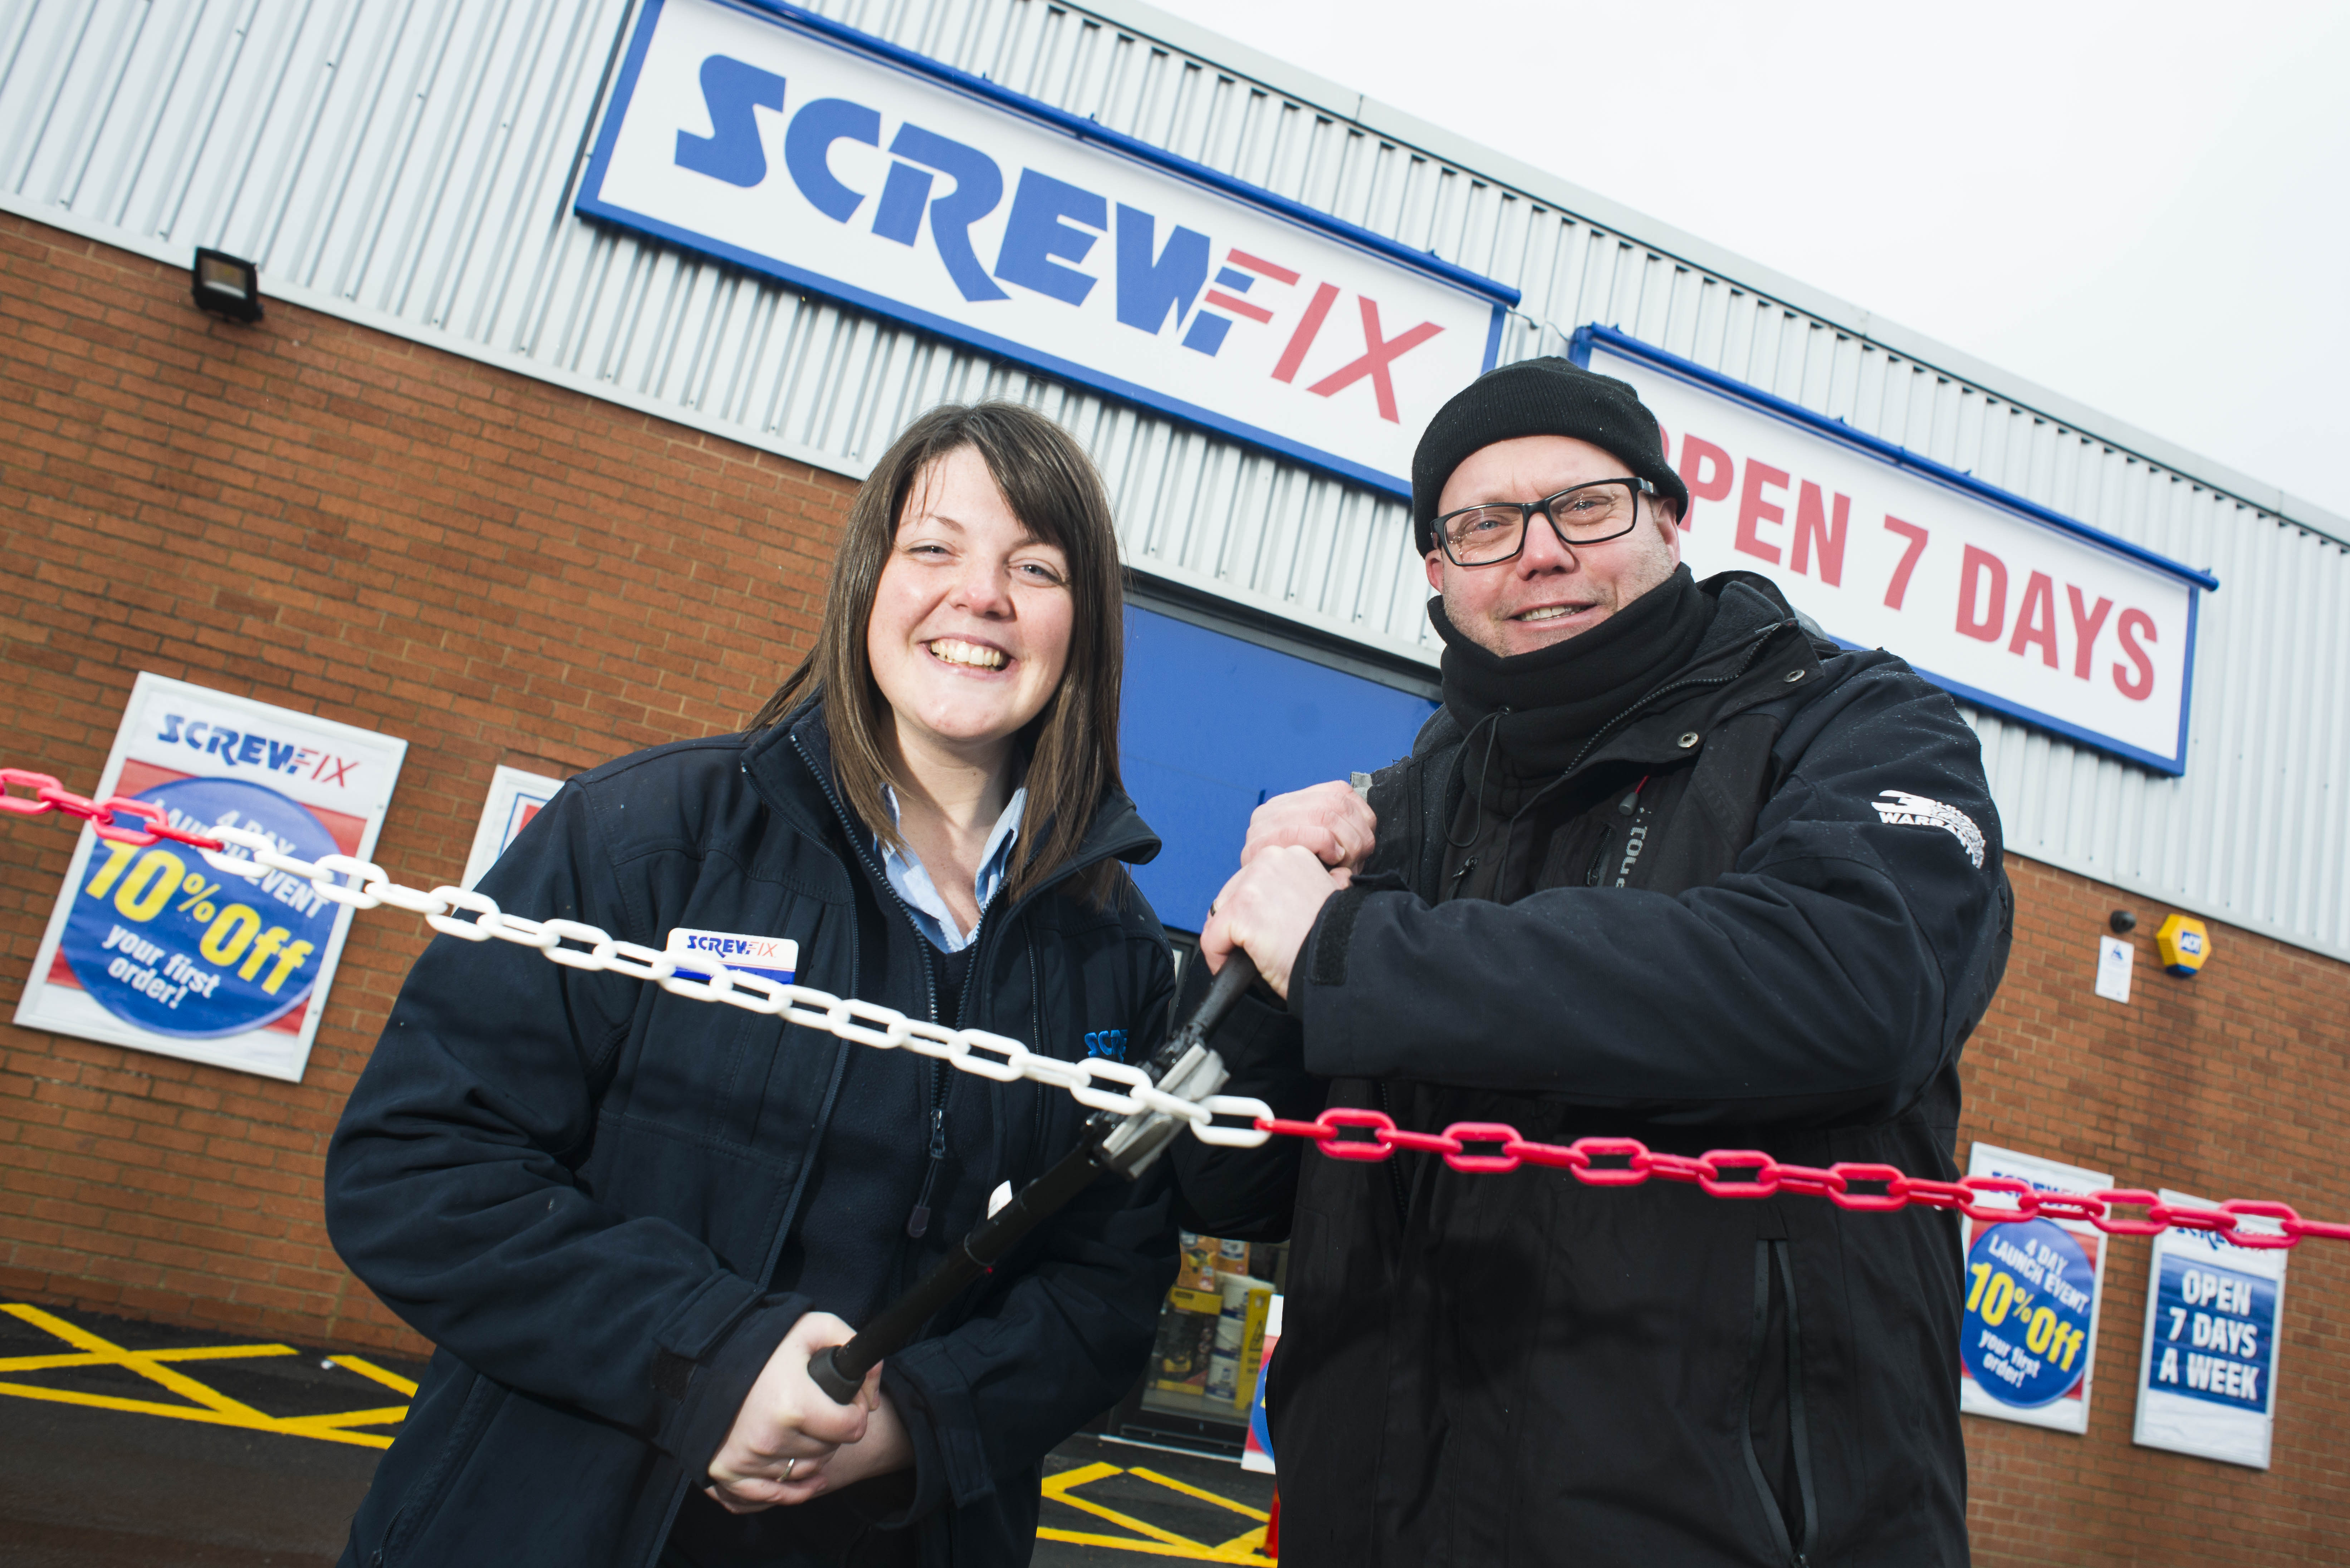 Louth’s first Screwfix store is declared a runaway success